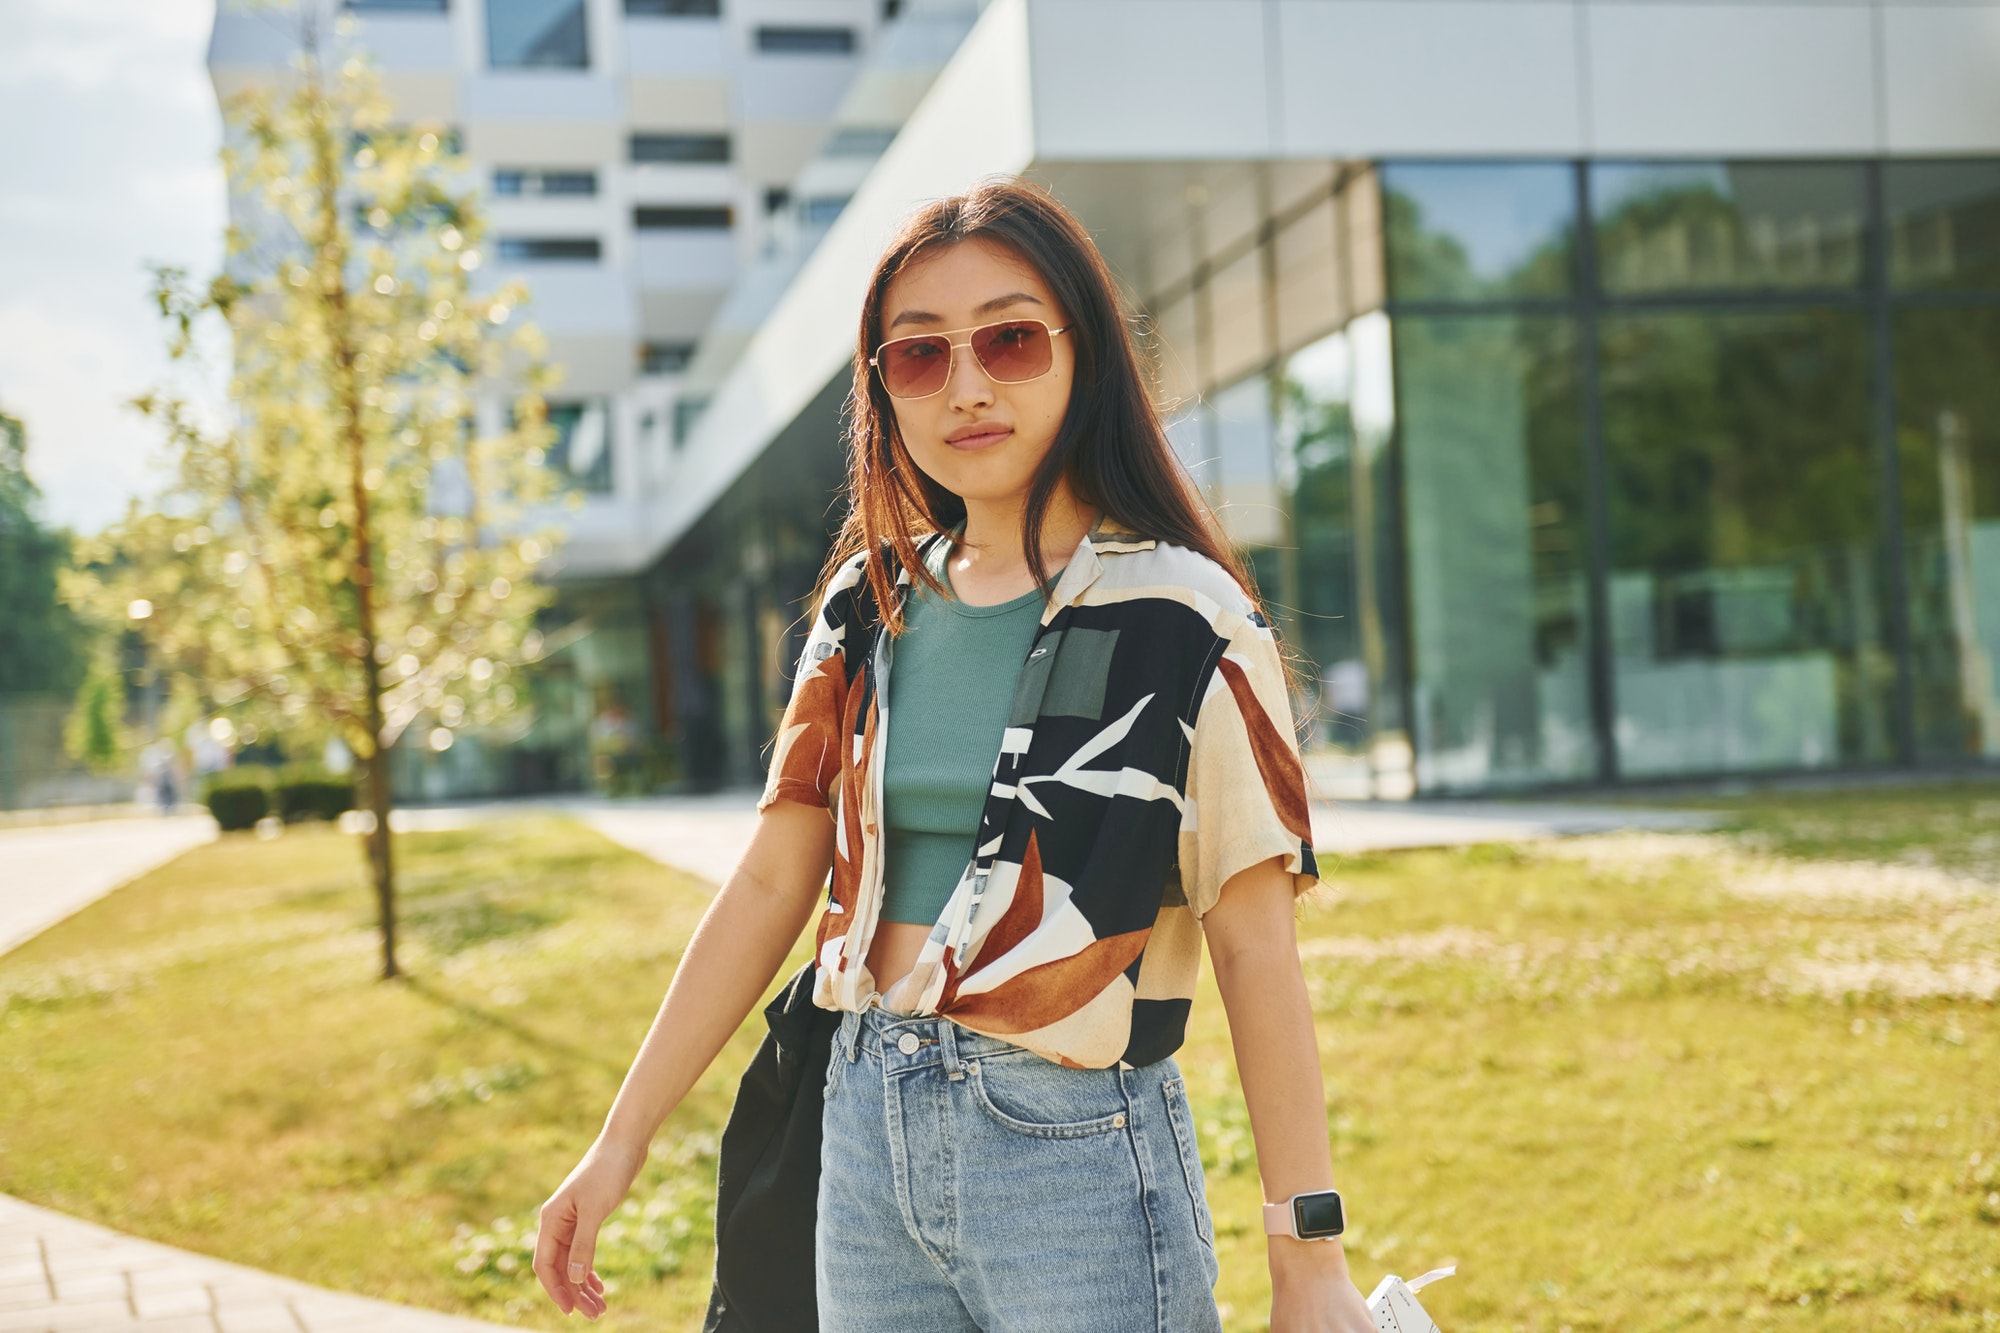 In sunglasses. Young asian woman is outdoors at daytime